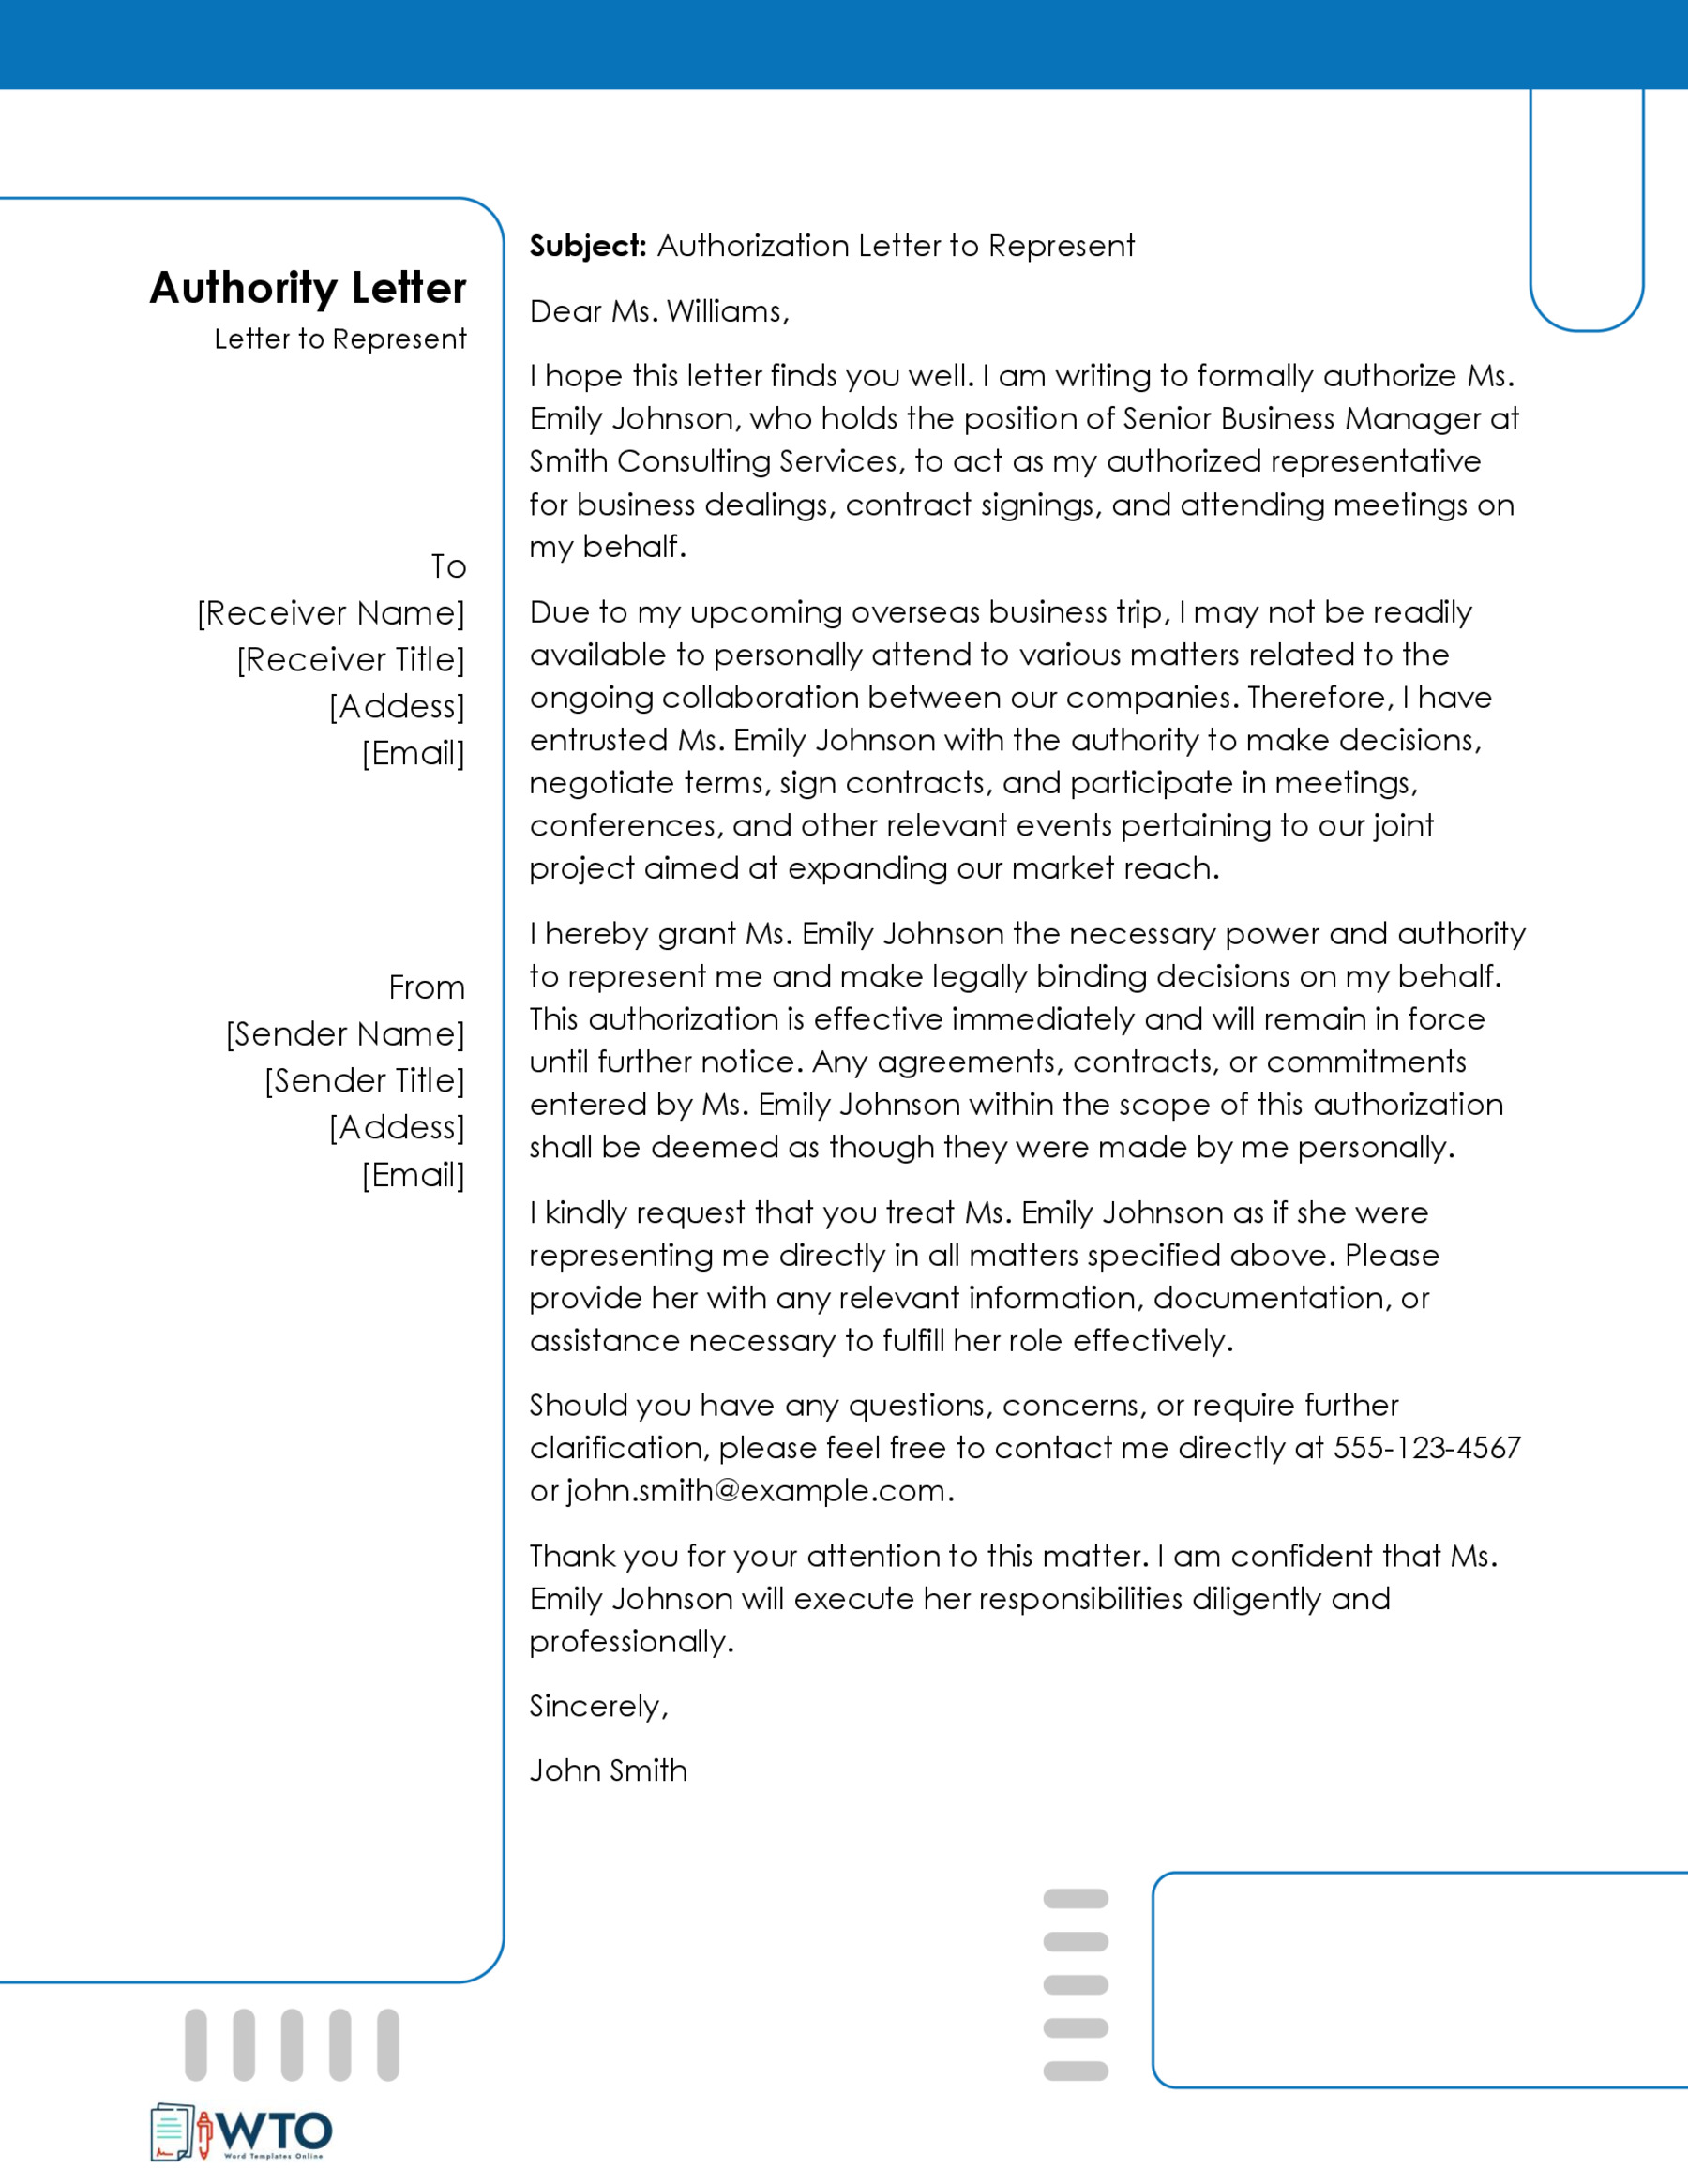 Free Sample Authorization Letter to Represent